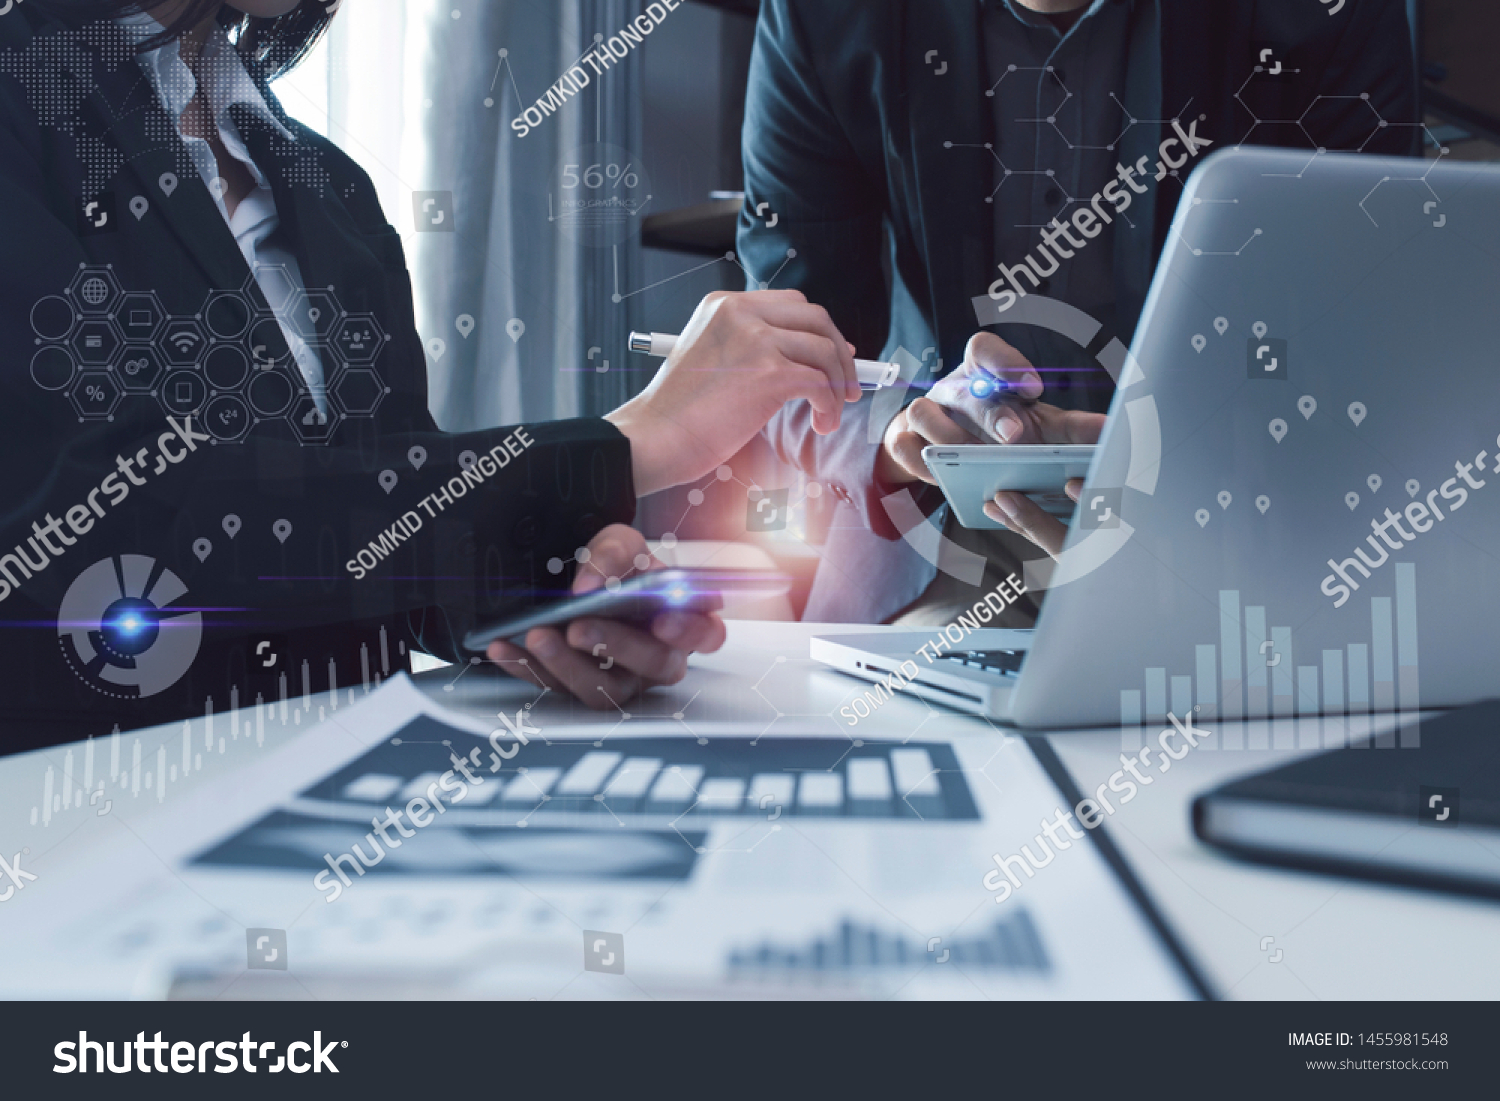 Concept of digital diagram, graph interfaces, Connections icon,Teamwork at business meeting, Business people working with laptop and tablet talking together in the modern Office. #1455981548